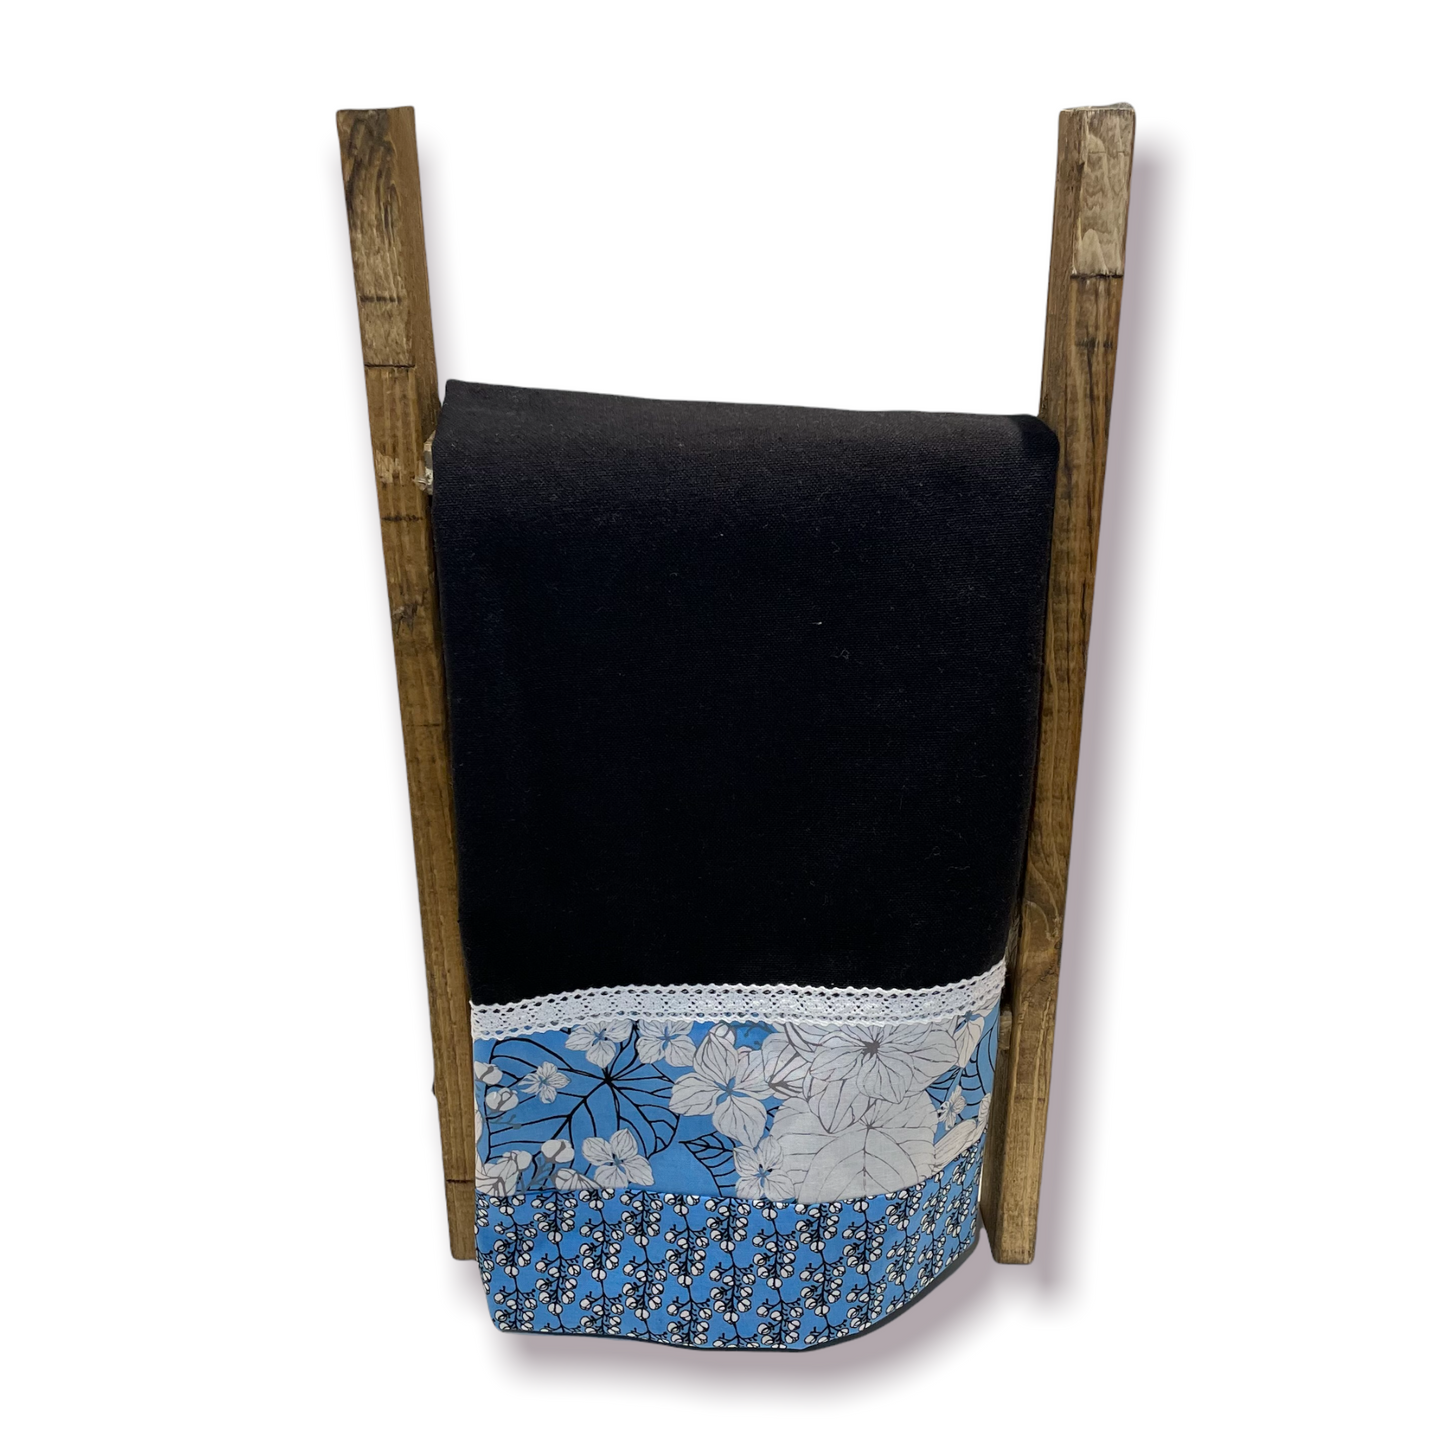 Blue and Black decorative dish towel for your kitchen. Black toweling with blue and white flower cotton accent material. White cotton lace trim. Handcrafted by Home Stitchery Decor. Find your favorite or watch tutorials on the Home Stitchery Decor YouTube Channel and make your own! 